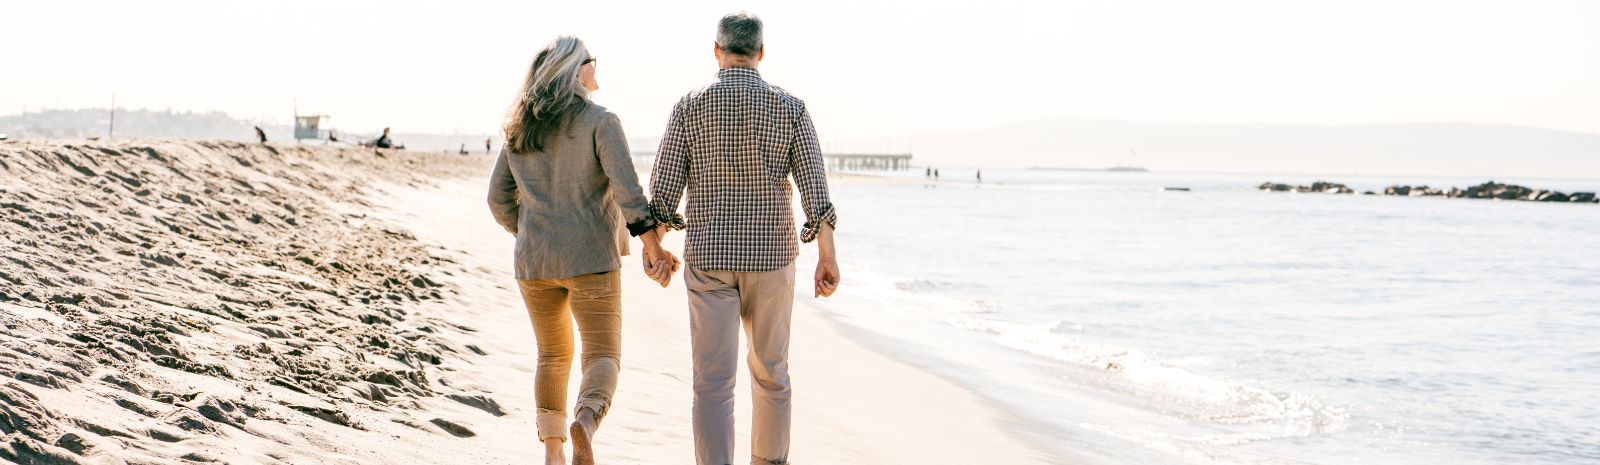 Couple walking down beach holding hands